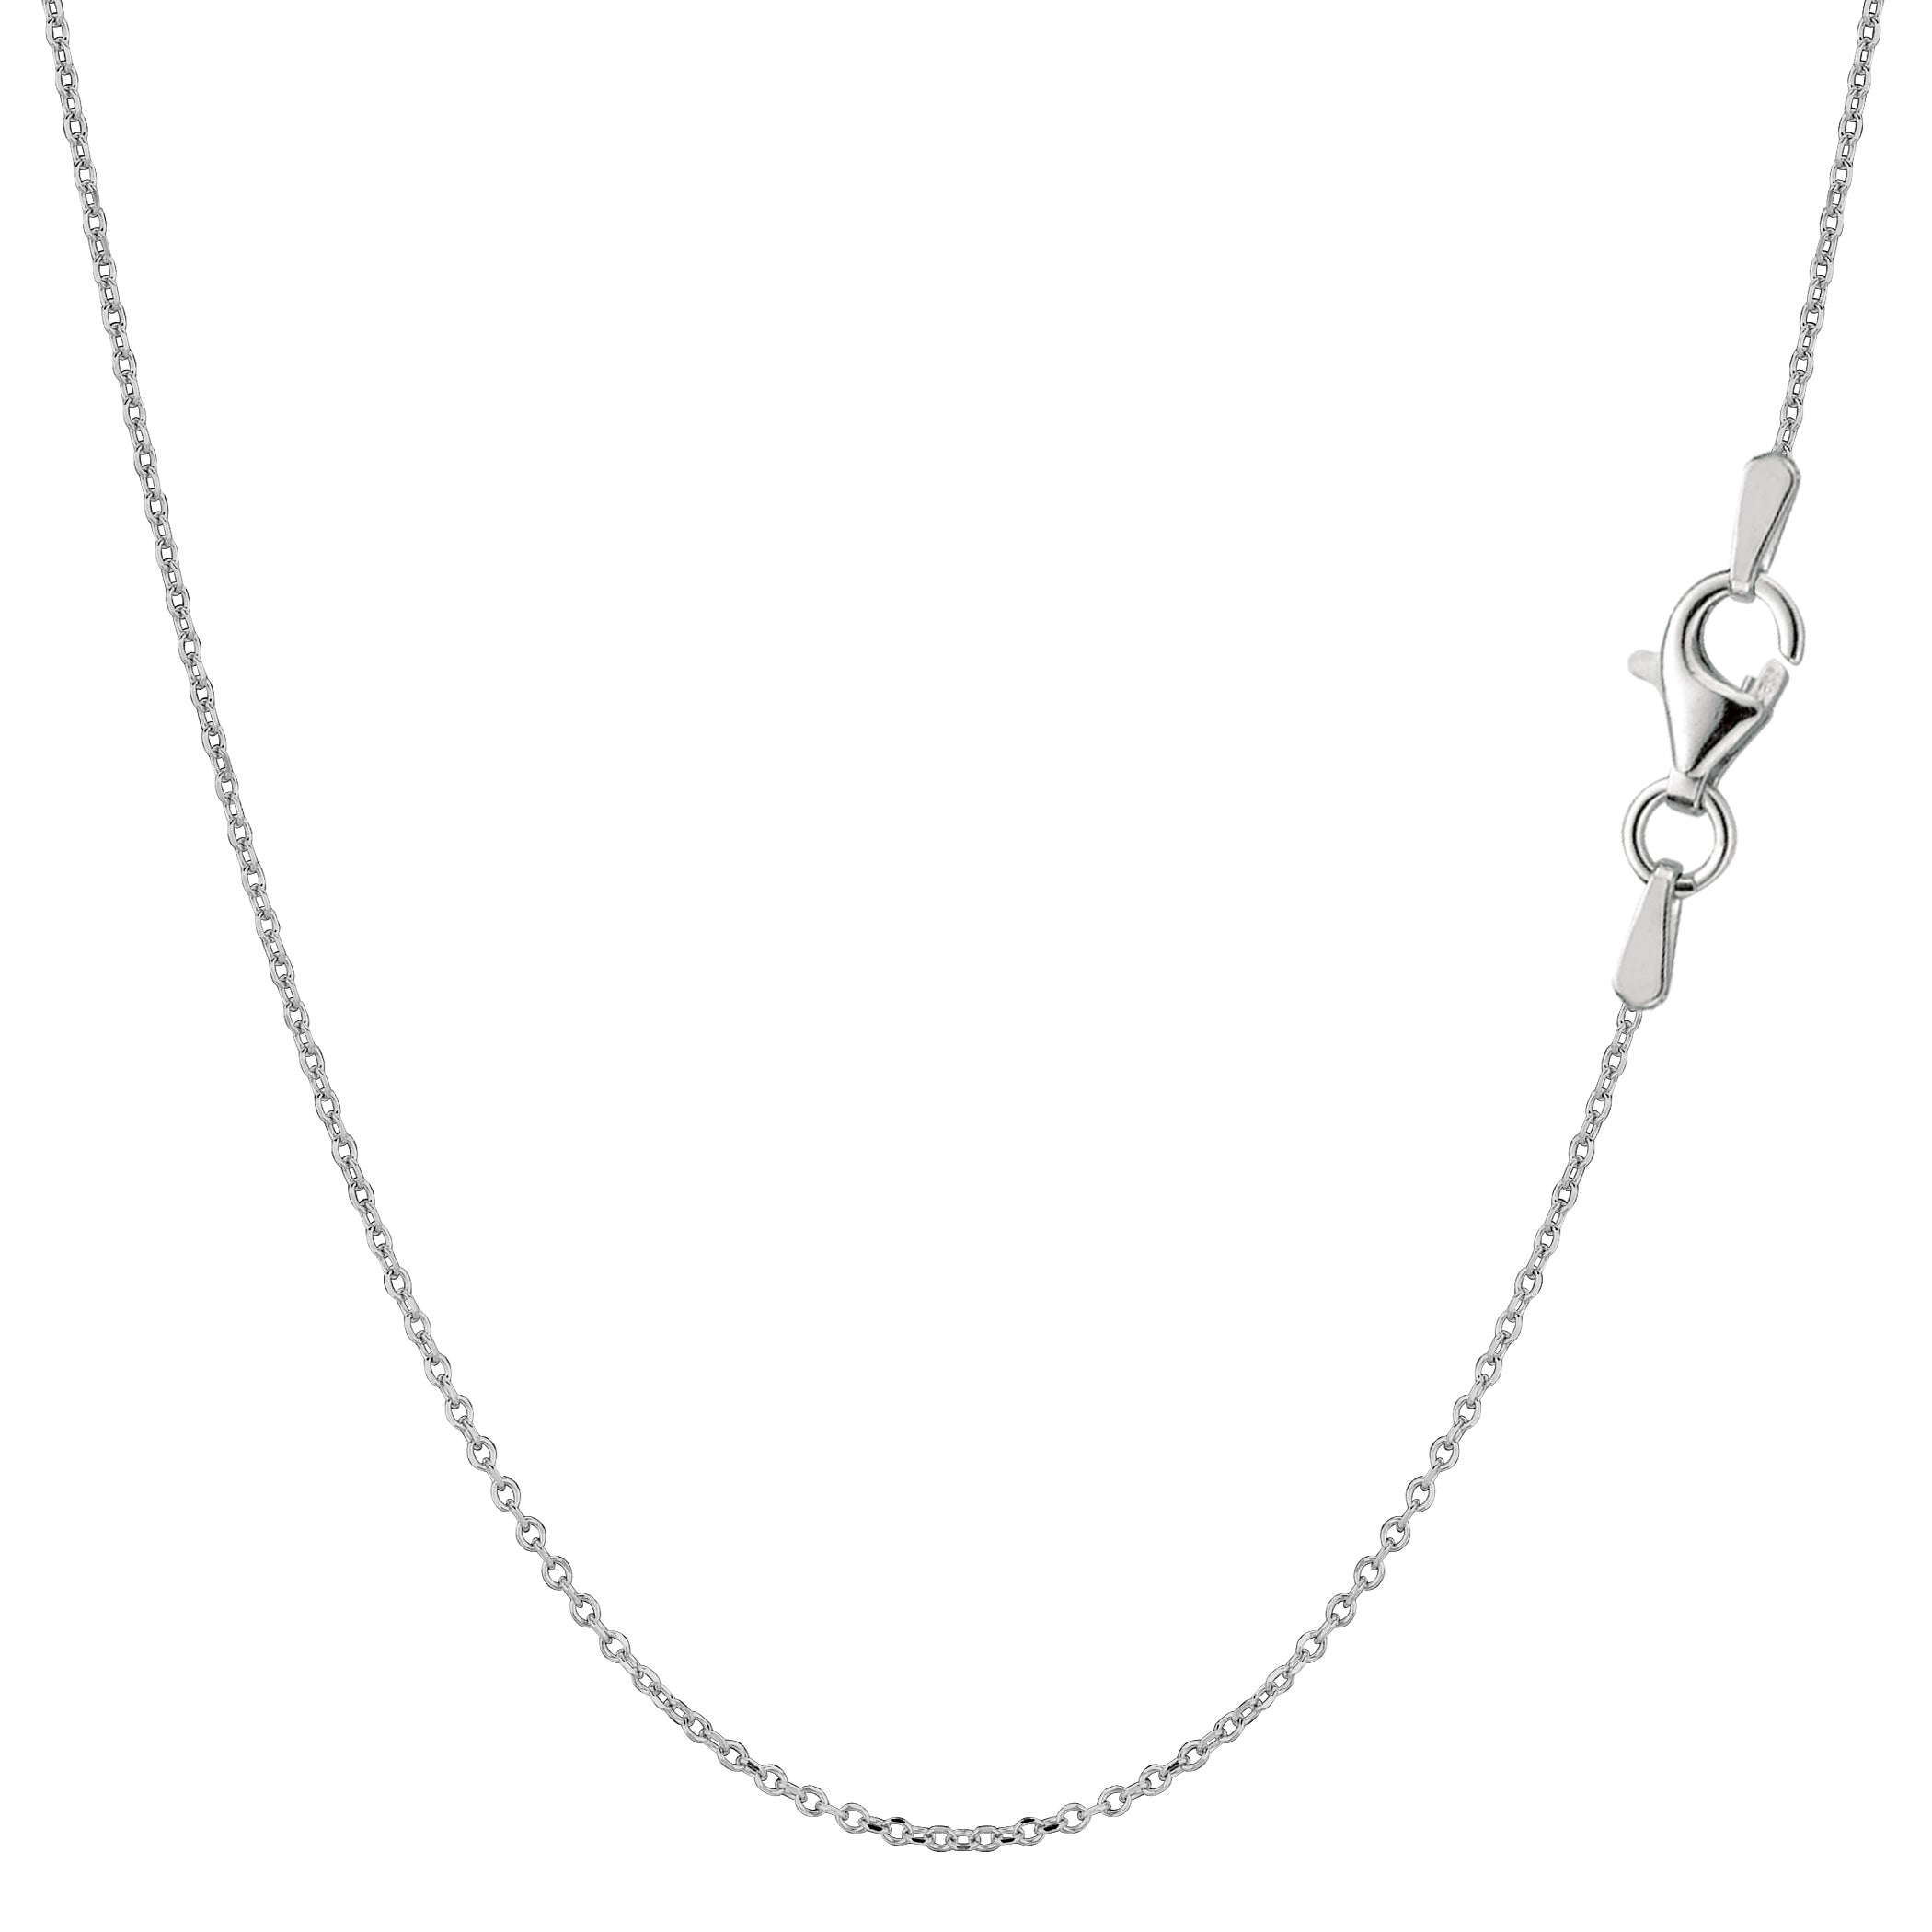 Sterling Silver Rhodium Plated Cable Chain Necklace, 0.8mm fine designer jewelry for men and women